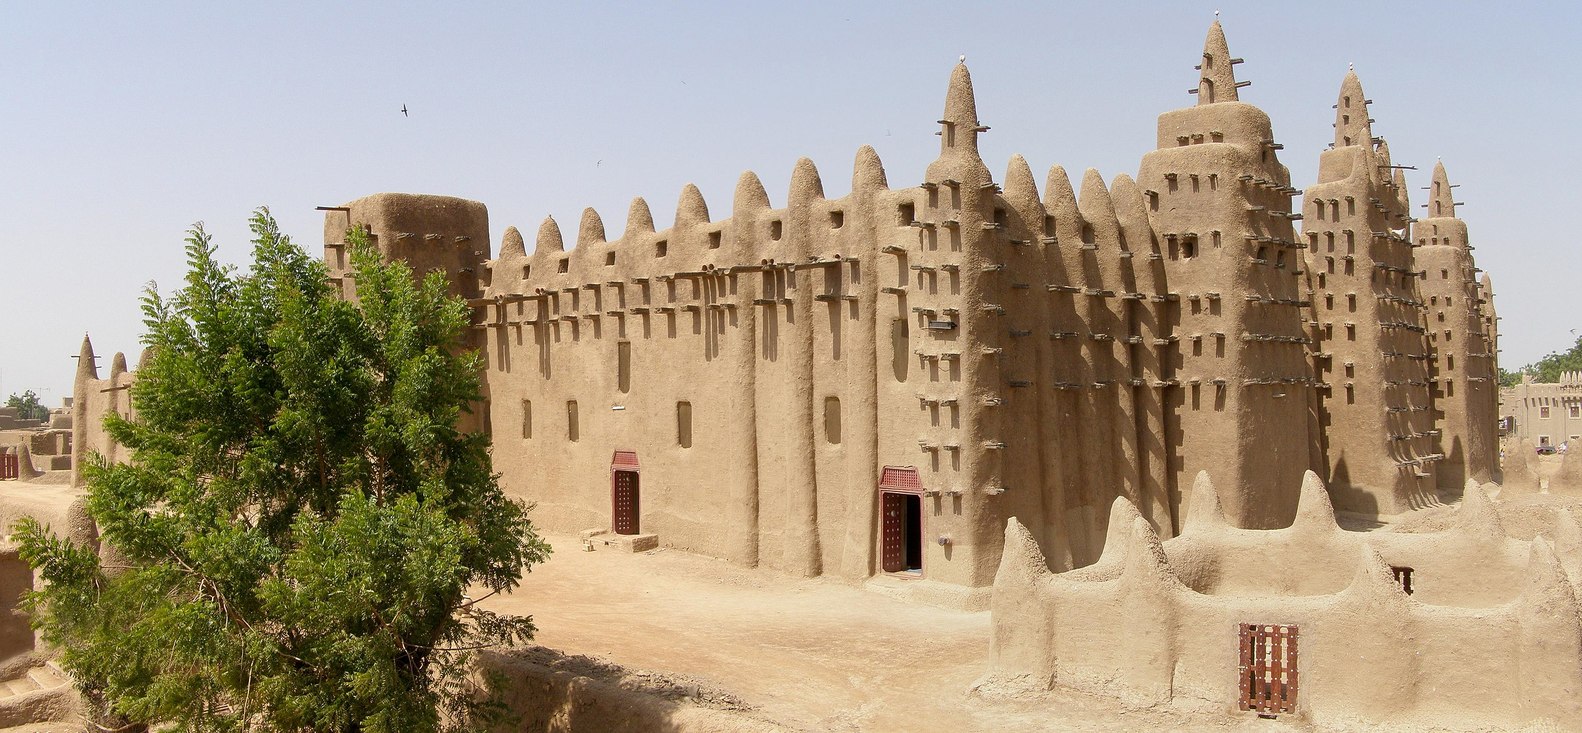 Quick View at Distinctive Mosques in Sub-Saharan Africa